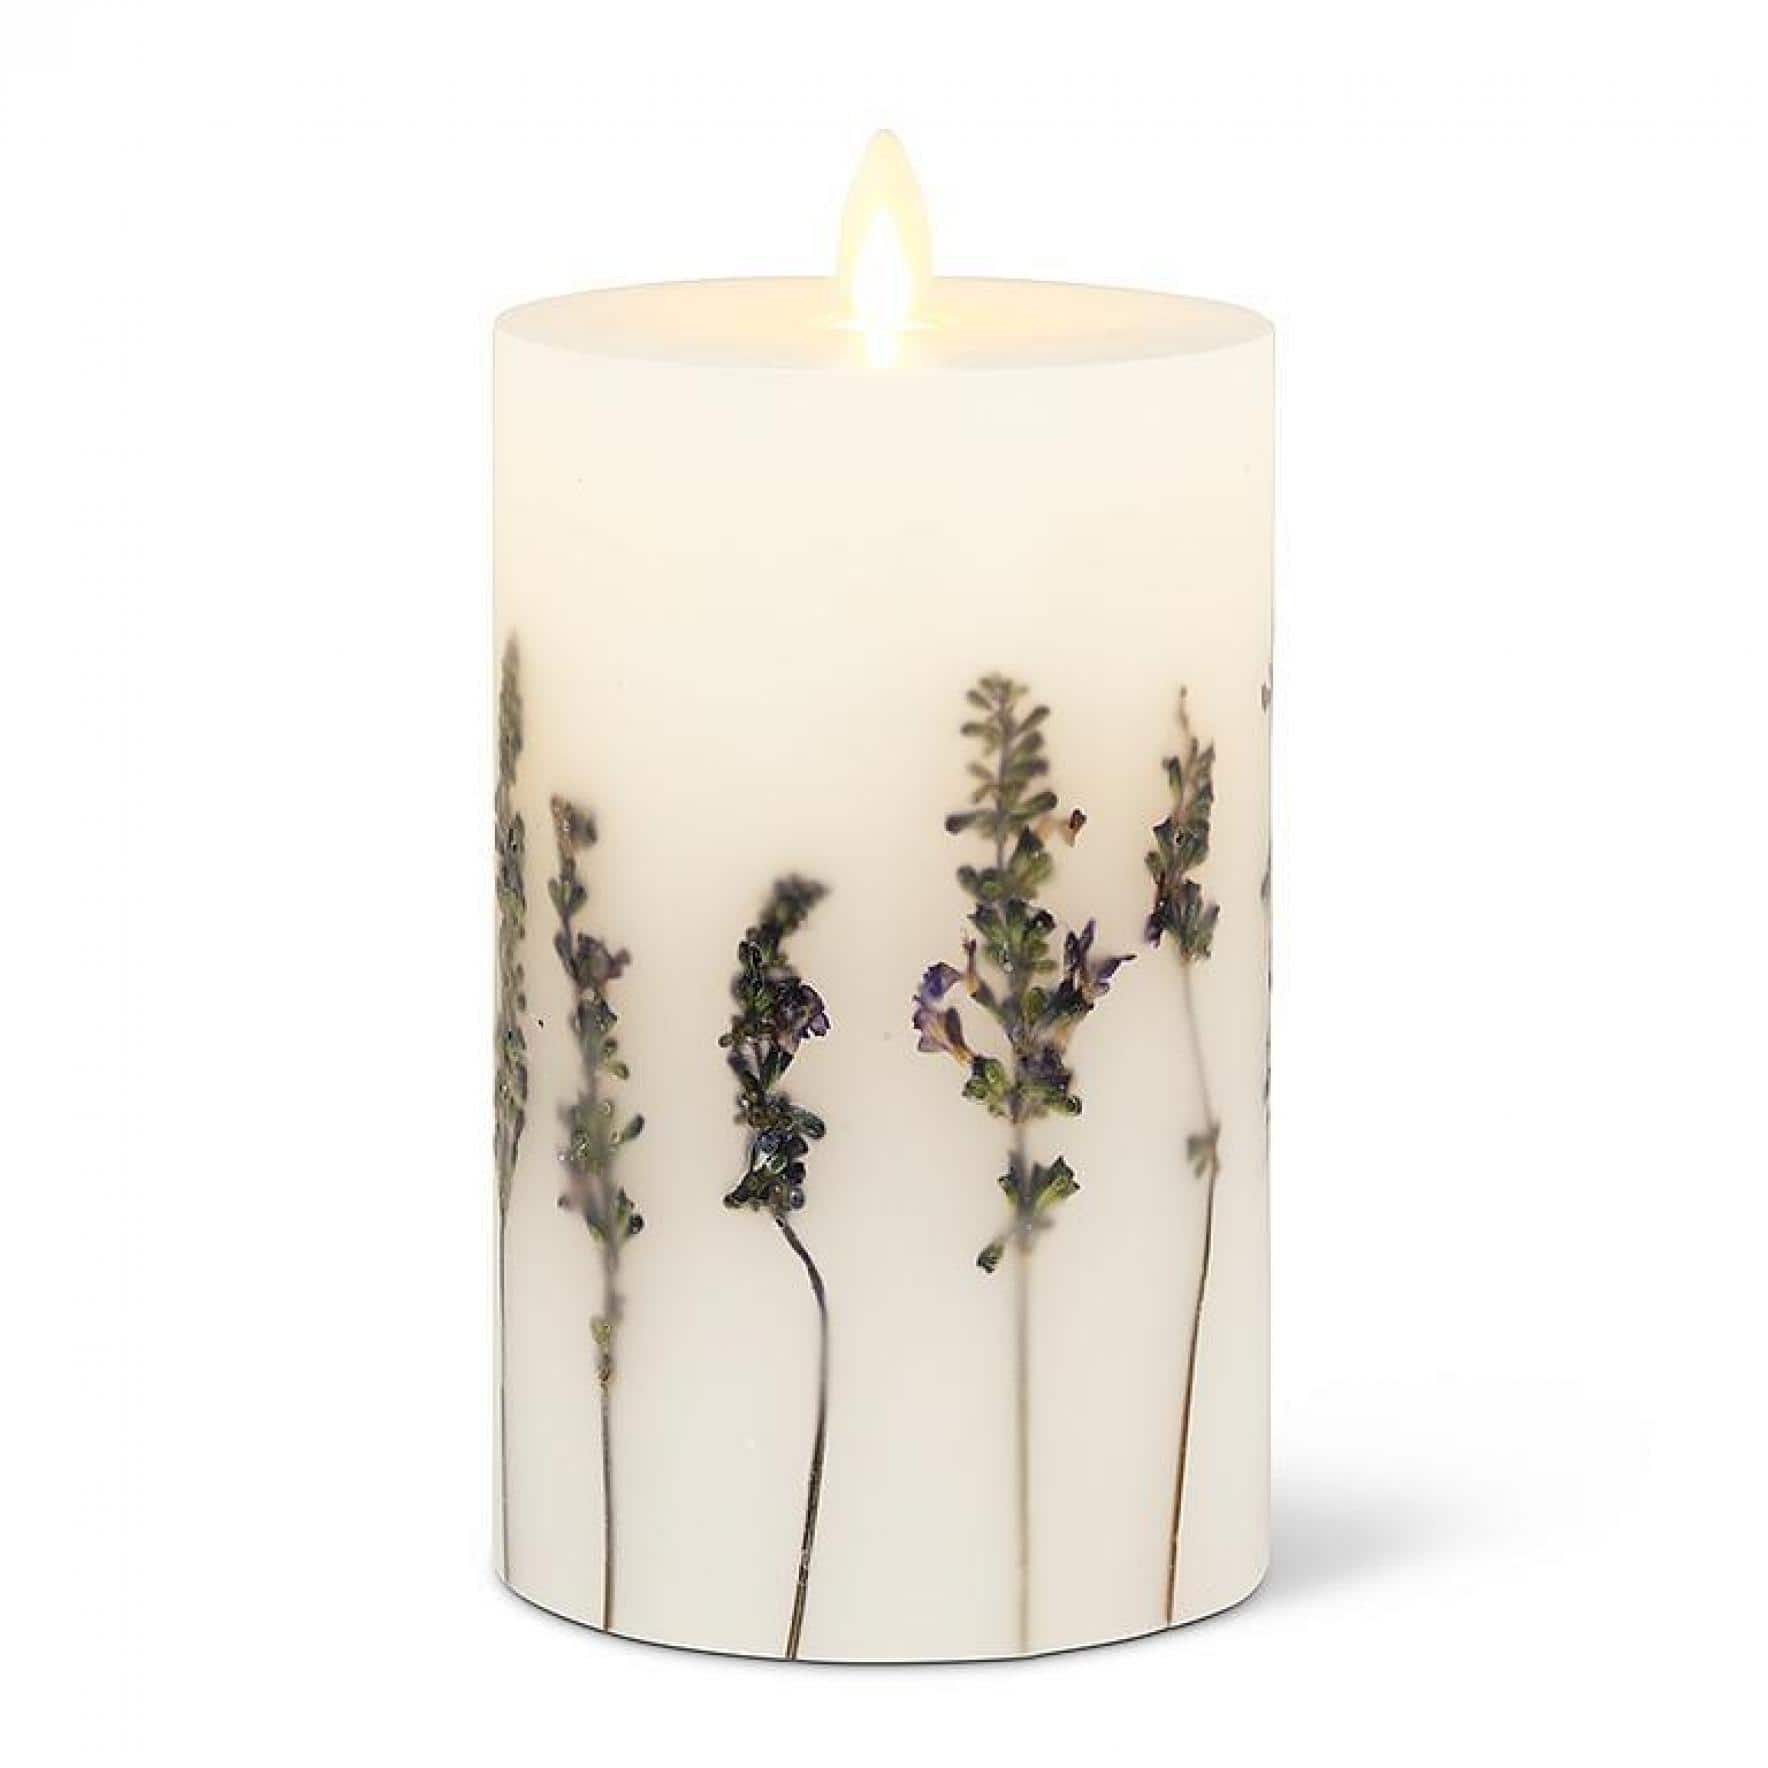 Flameless Reallite Lavender Candle - On Sale - Bed Bath & Beyond - 40025506